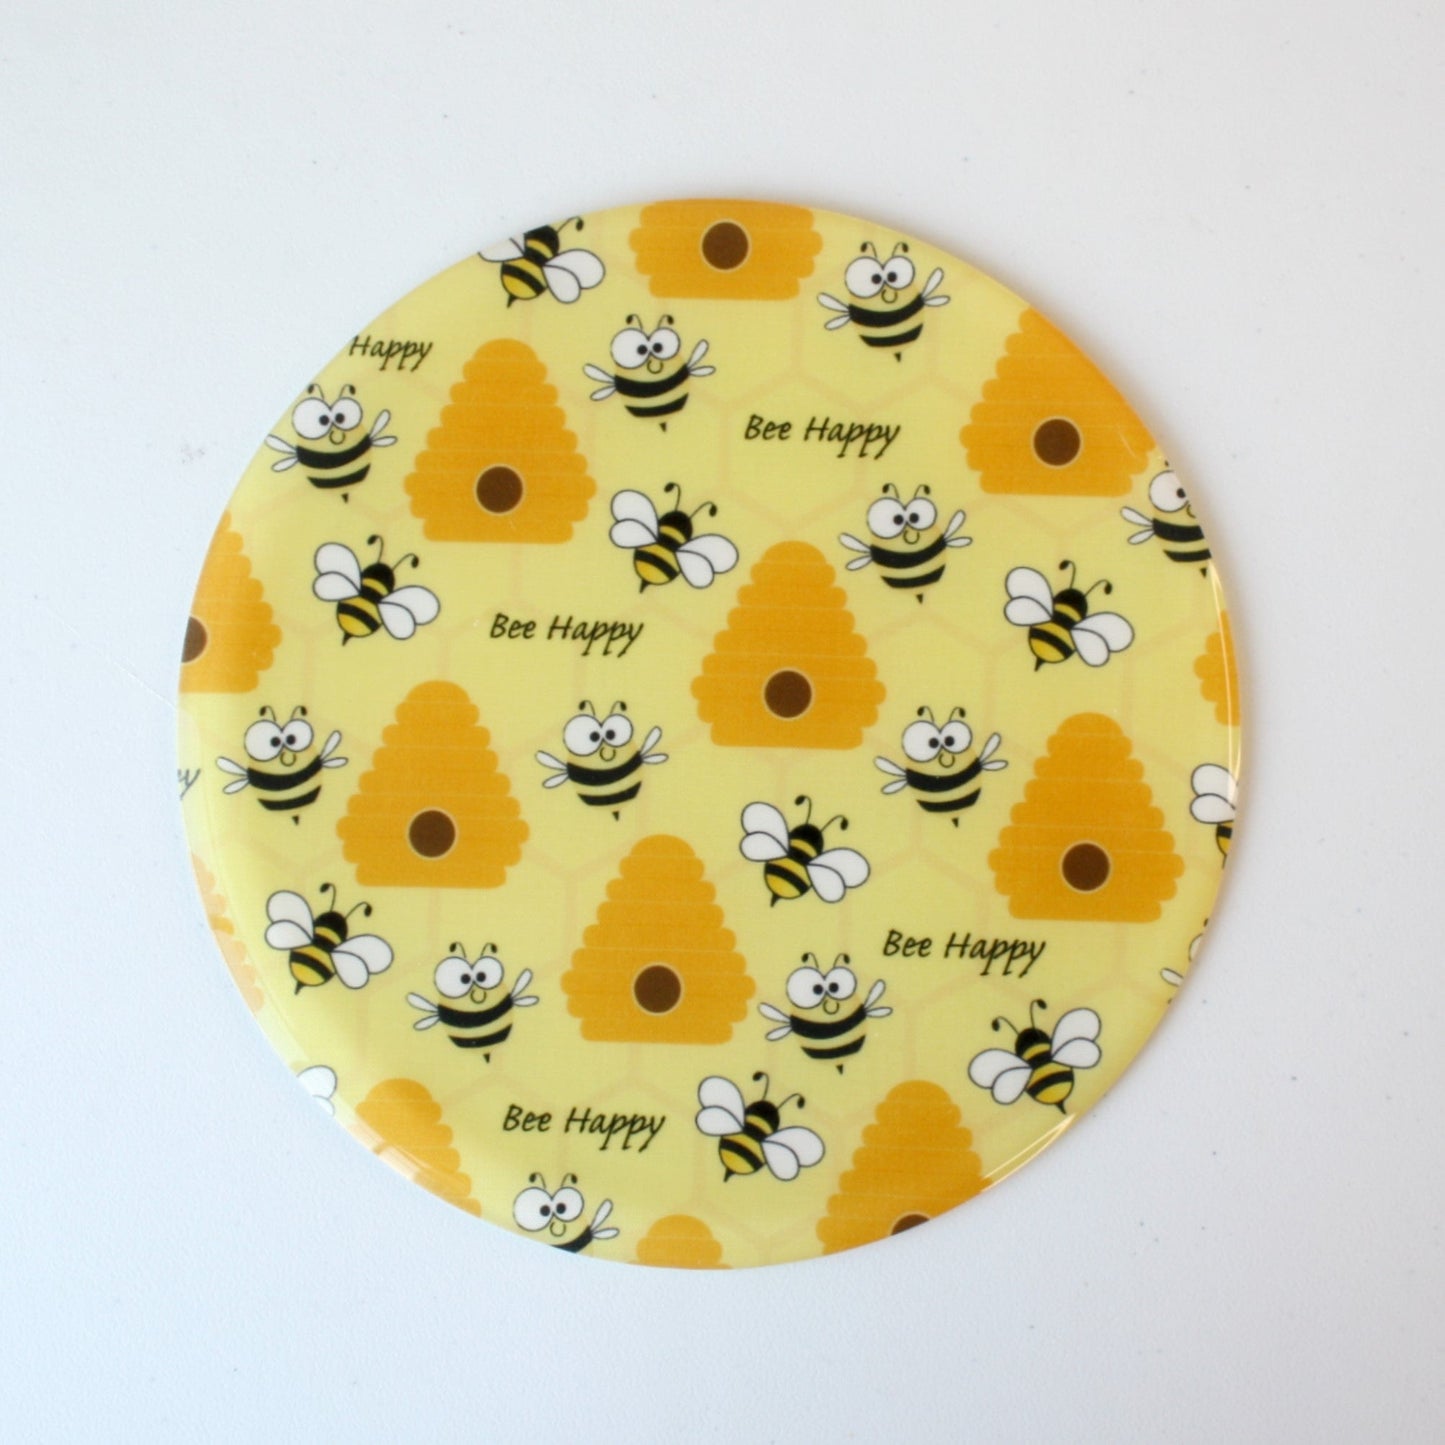 Silicone Trivets and Jar Openers - Bee Happy - Made in the USA